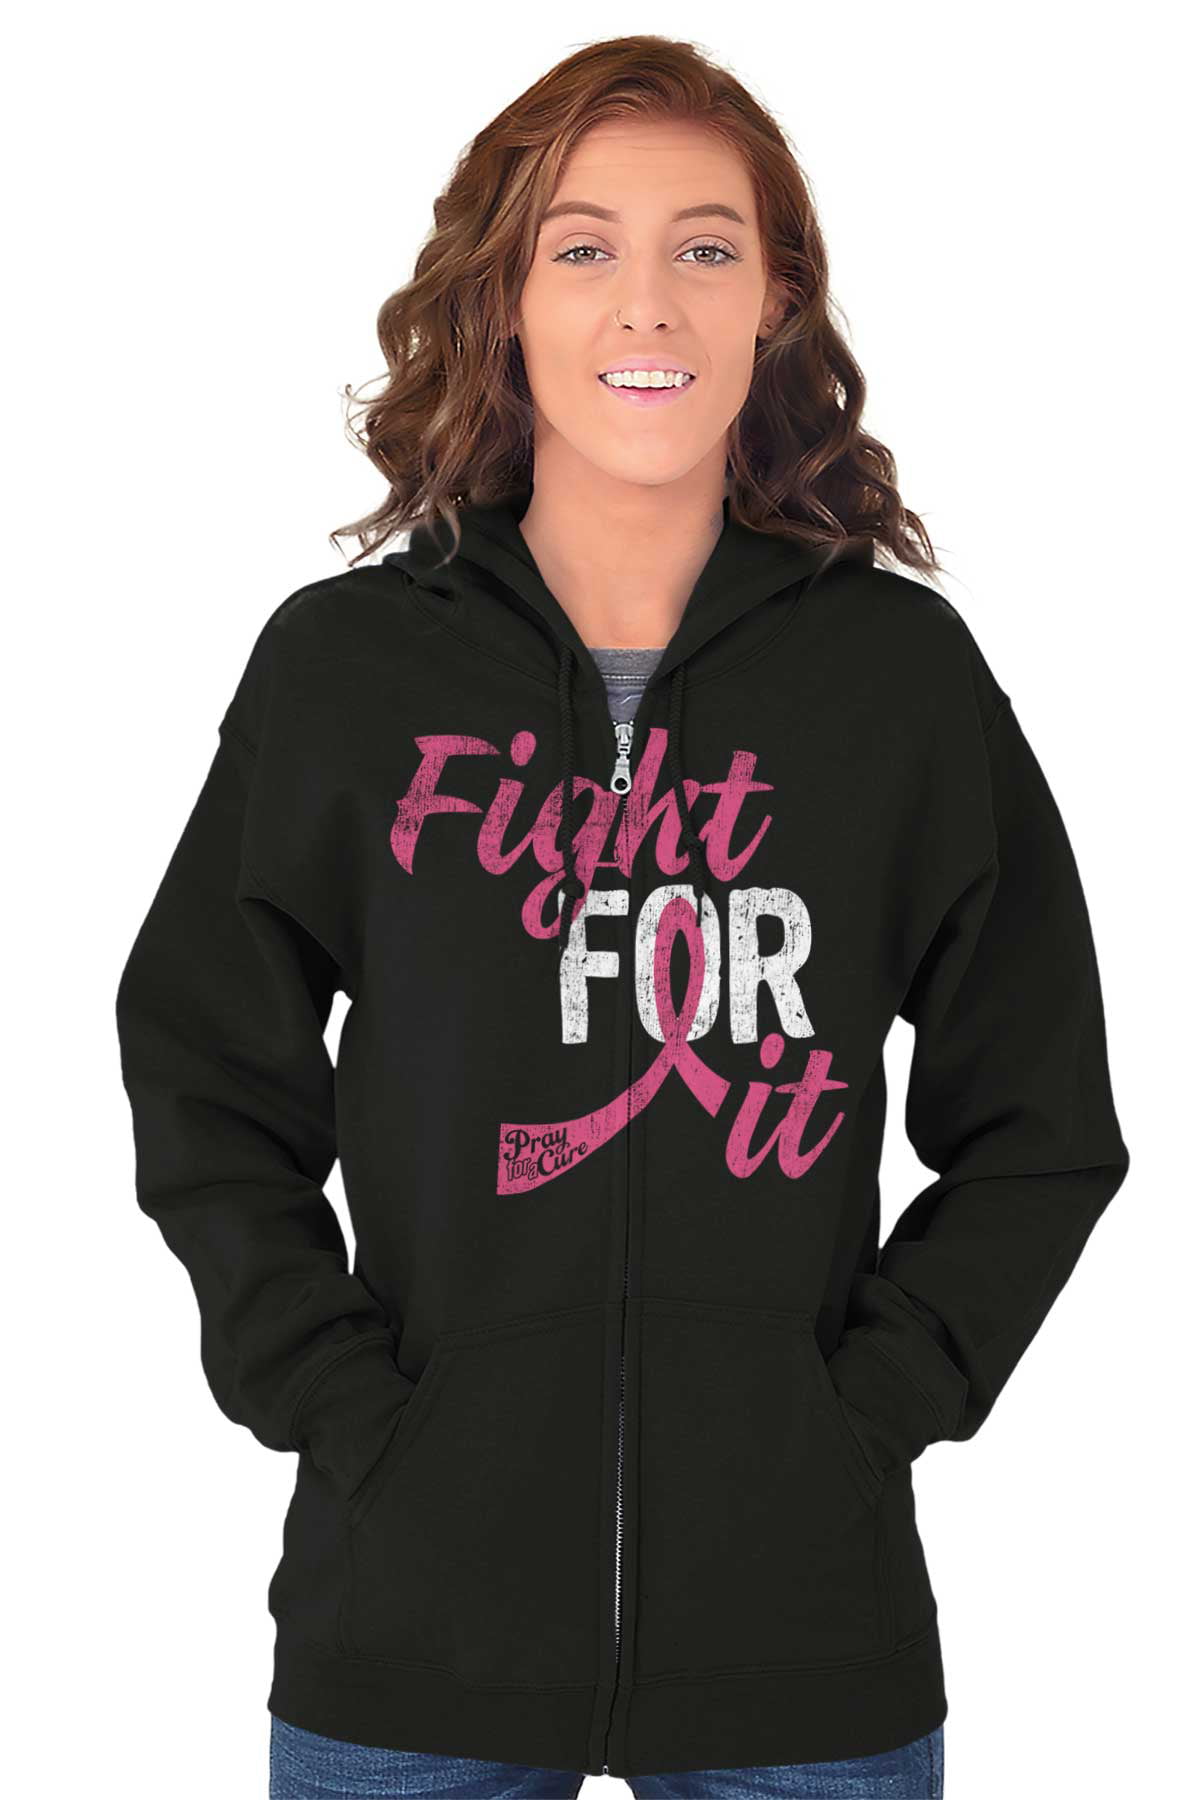 Breast Cancer Awareness ShirtCelebrate Life Pink Butterfly Zip Hoodie 